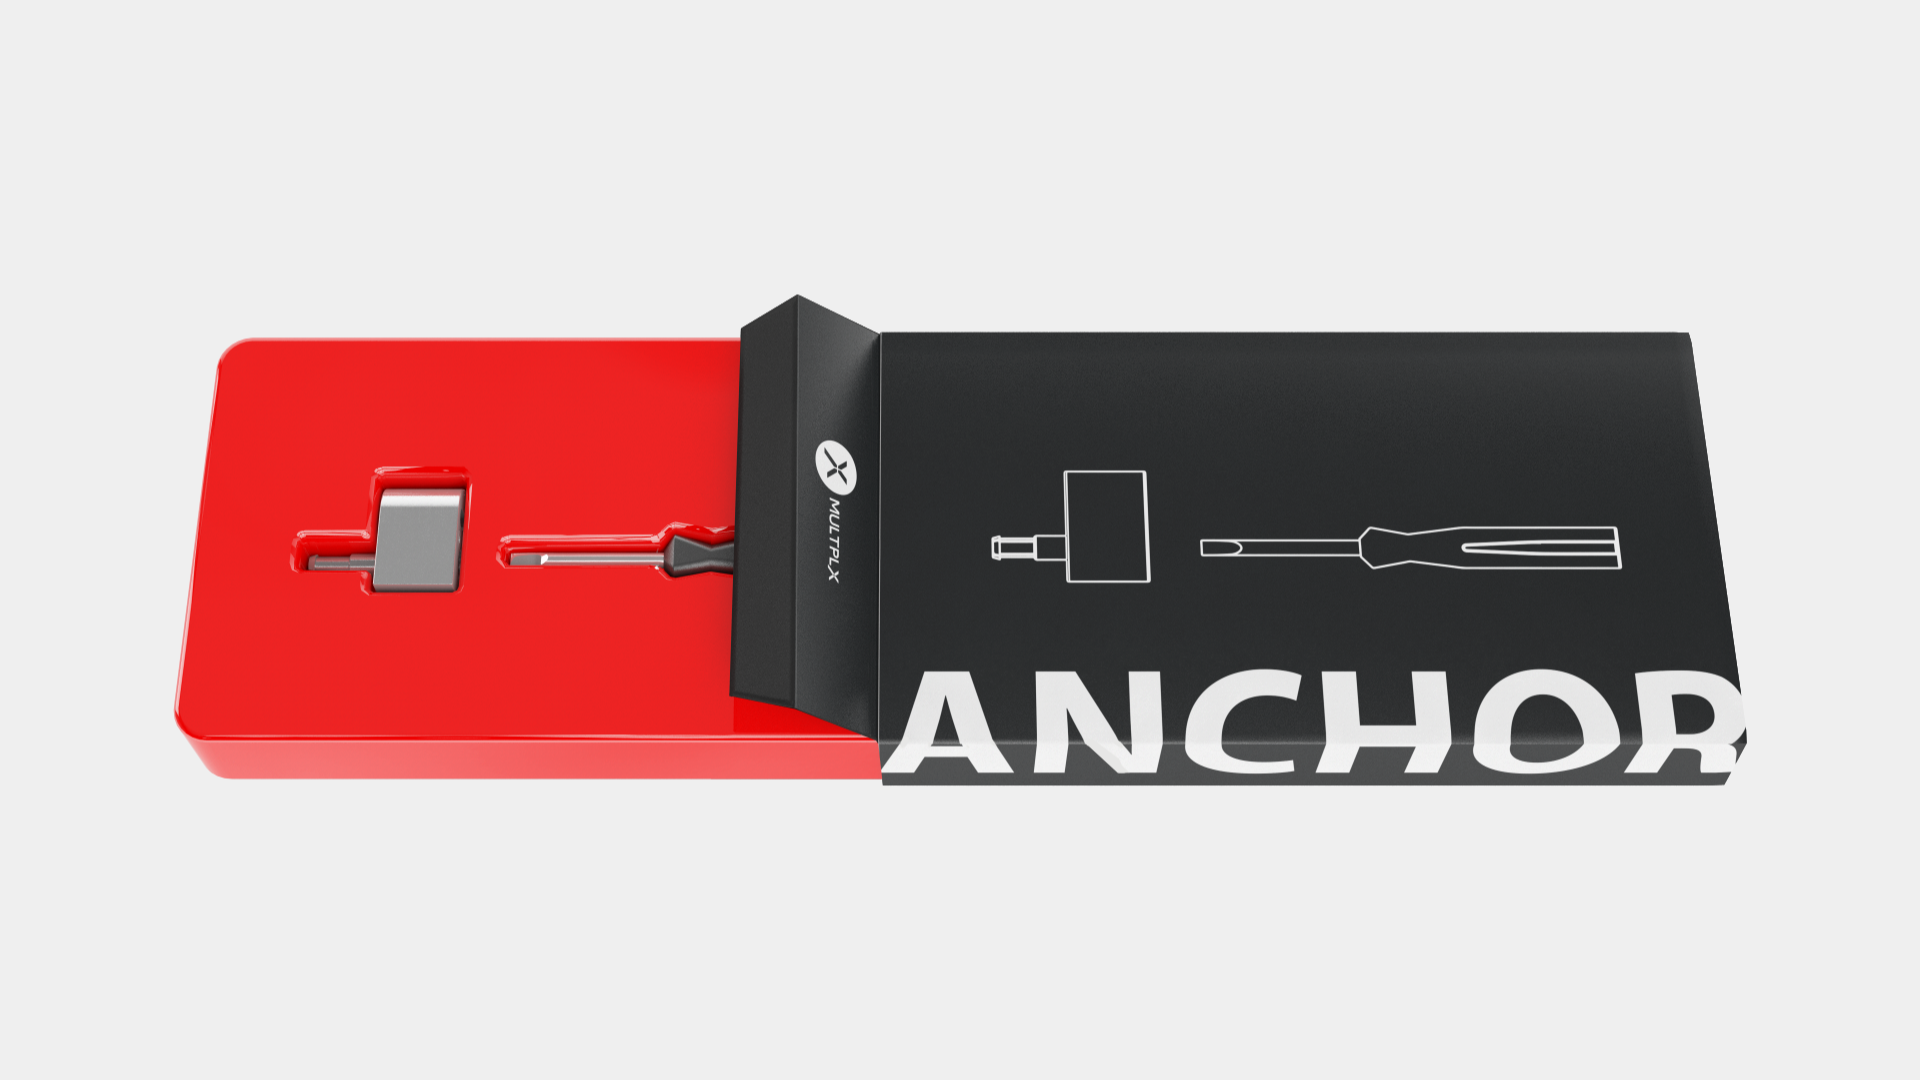 Load video: Anchor - How it works